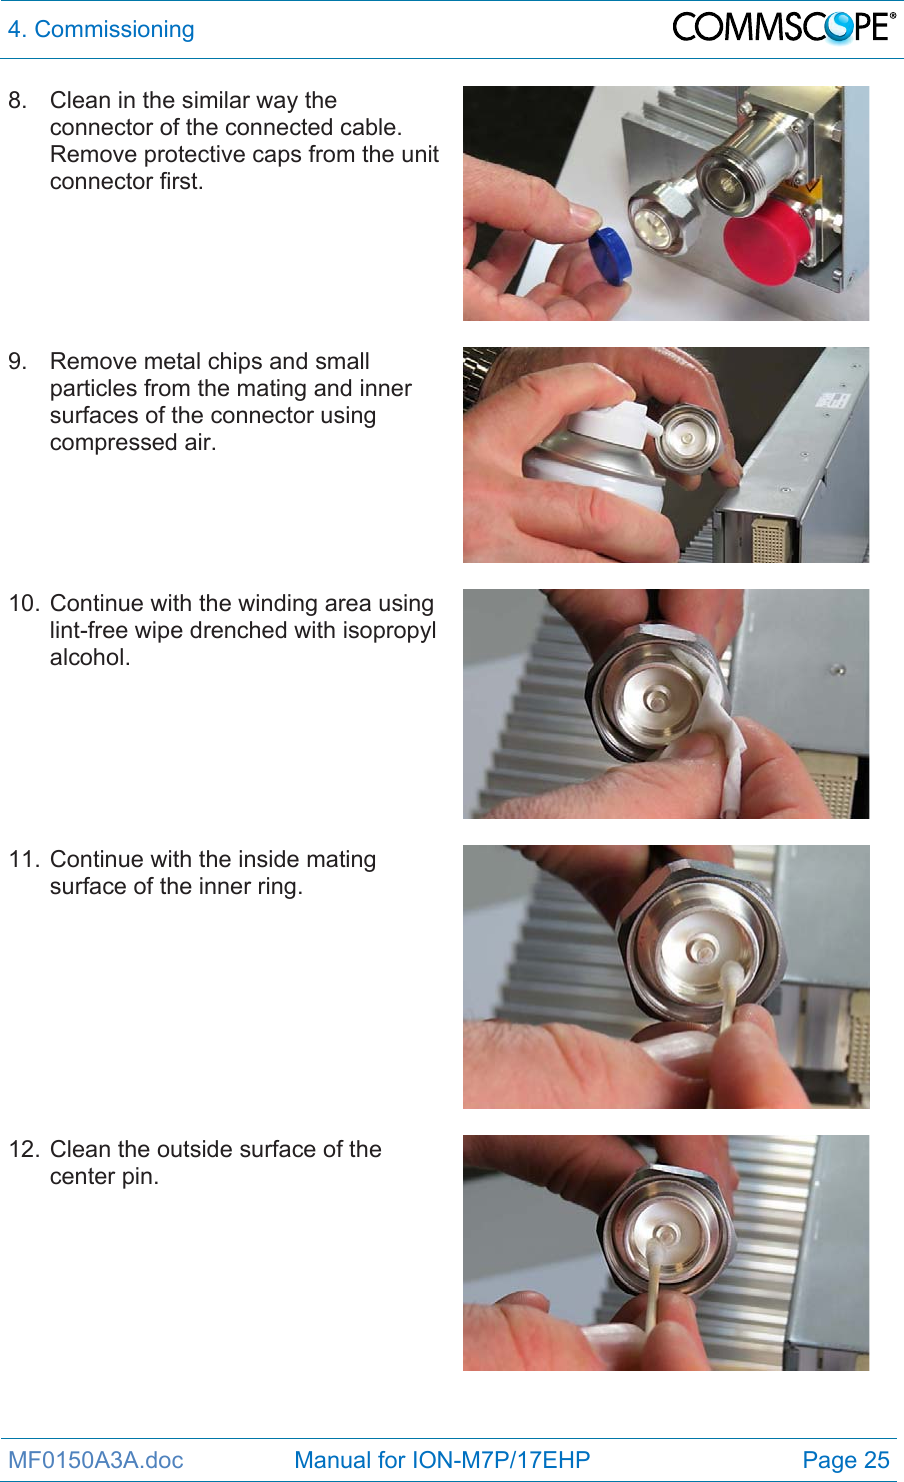 4. Commissioning  MF0150A3A.doc                 Manual for ION-M7P/17EHP  Page 25 8.  Clean in the similar way the connector of the connected cable. Remove protective caps from the unit connector first.  9.  Remove metal chips and small particles from the mating and inner surfaces of the connector using compressed air.   10. Continue with the winding area using lint-free wipe drenched with isopropyl alcohol.   11. Continue with the inside mating surface of the inner ring.   12. Clean the outside surface of the center pin. 